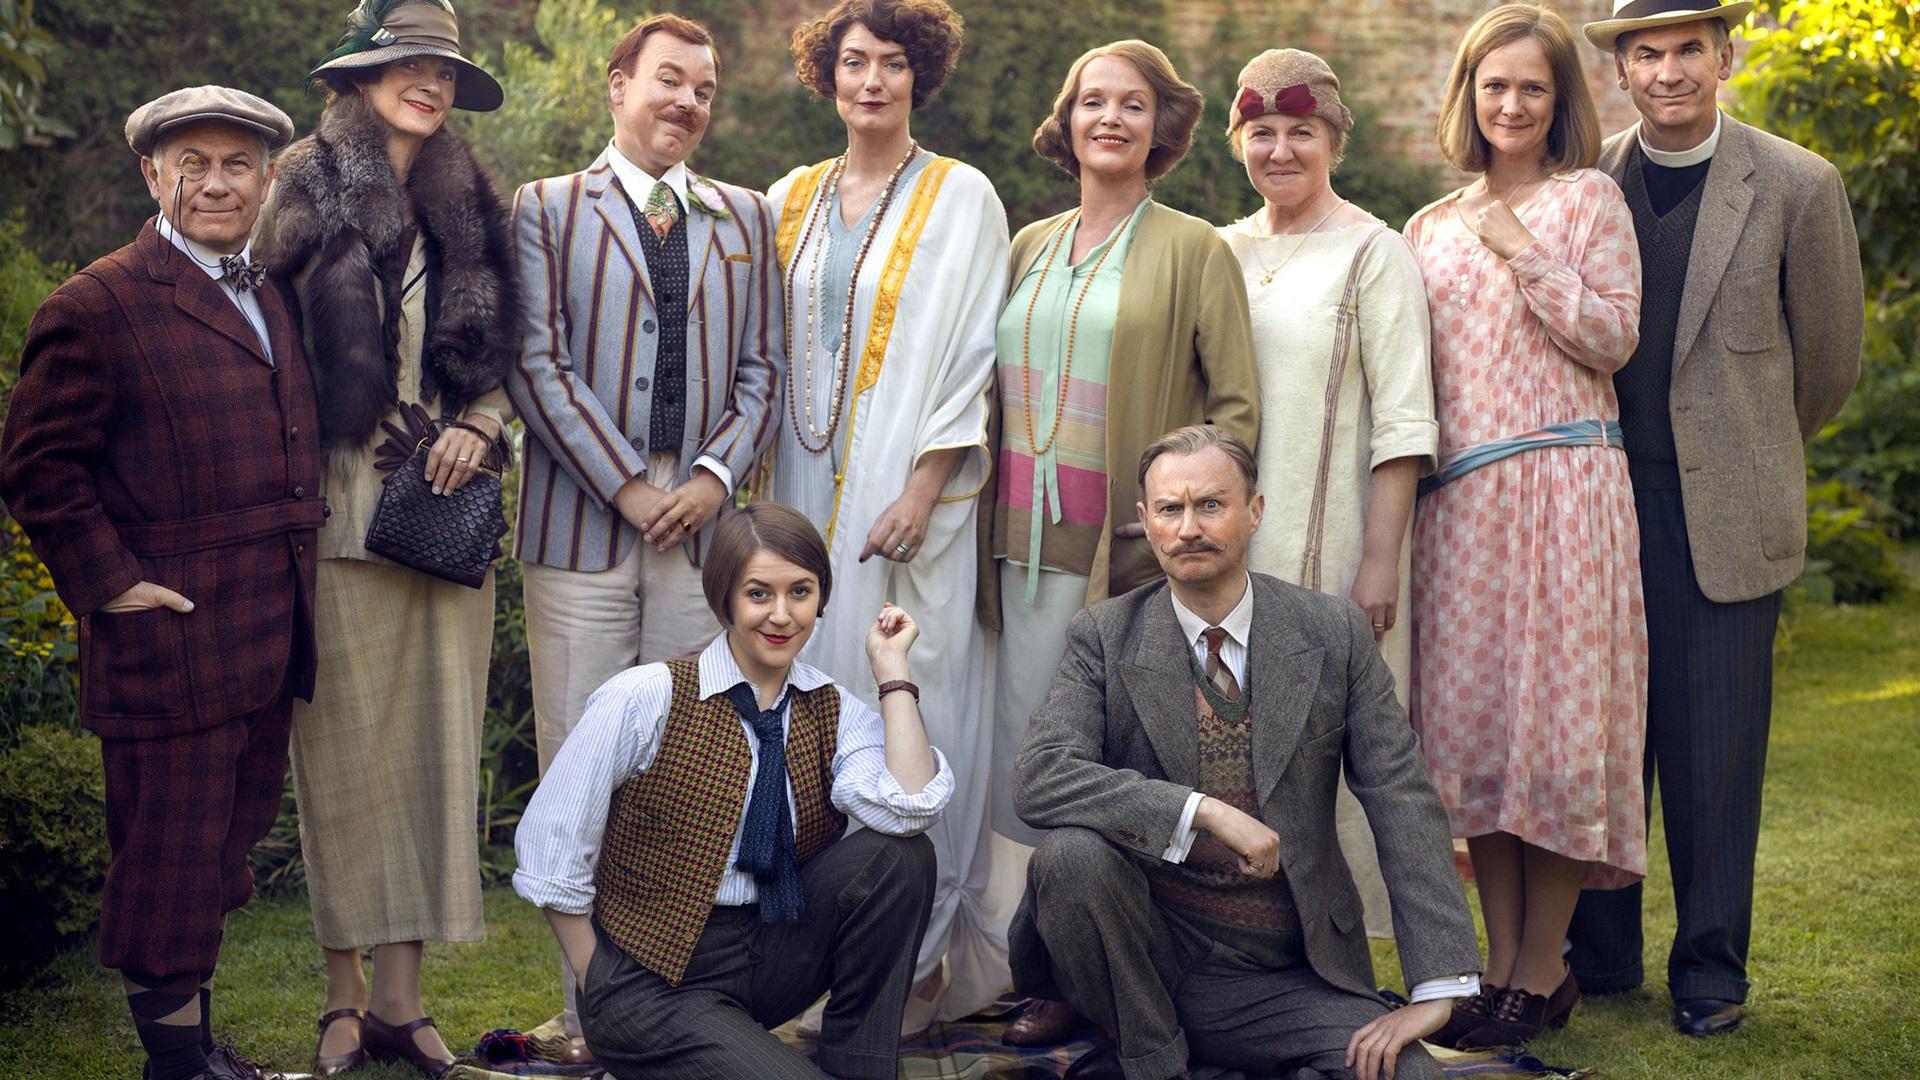 Mapp and Lucia (2014)